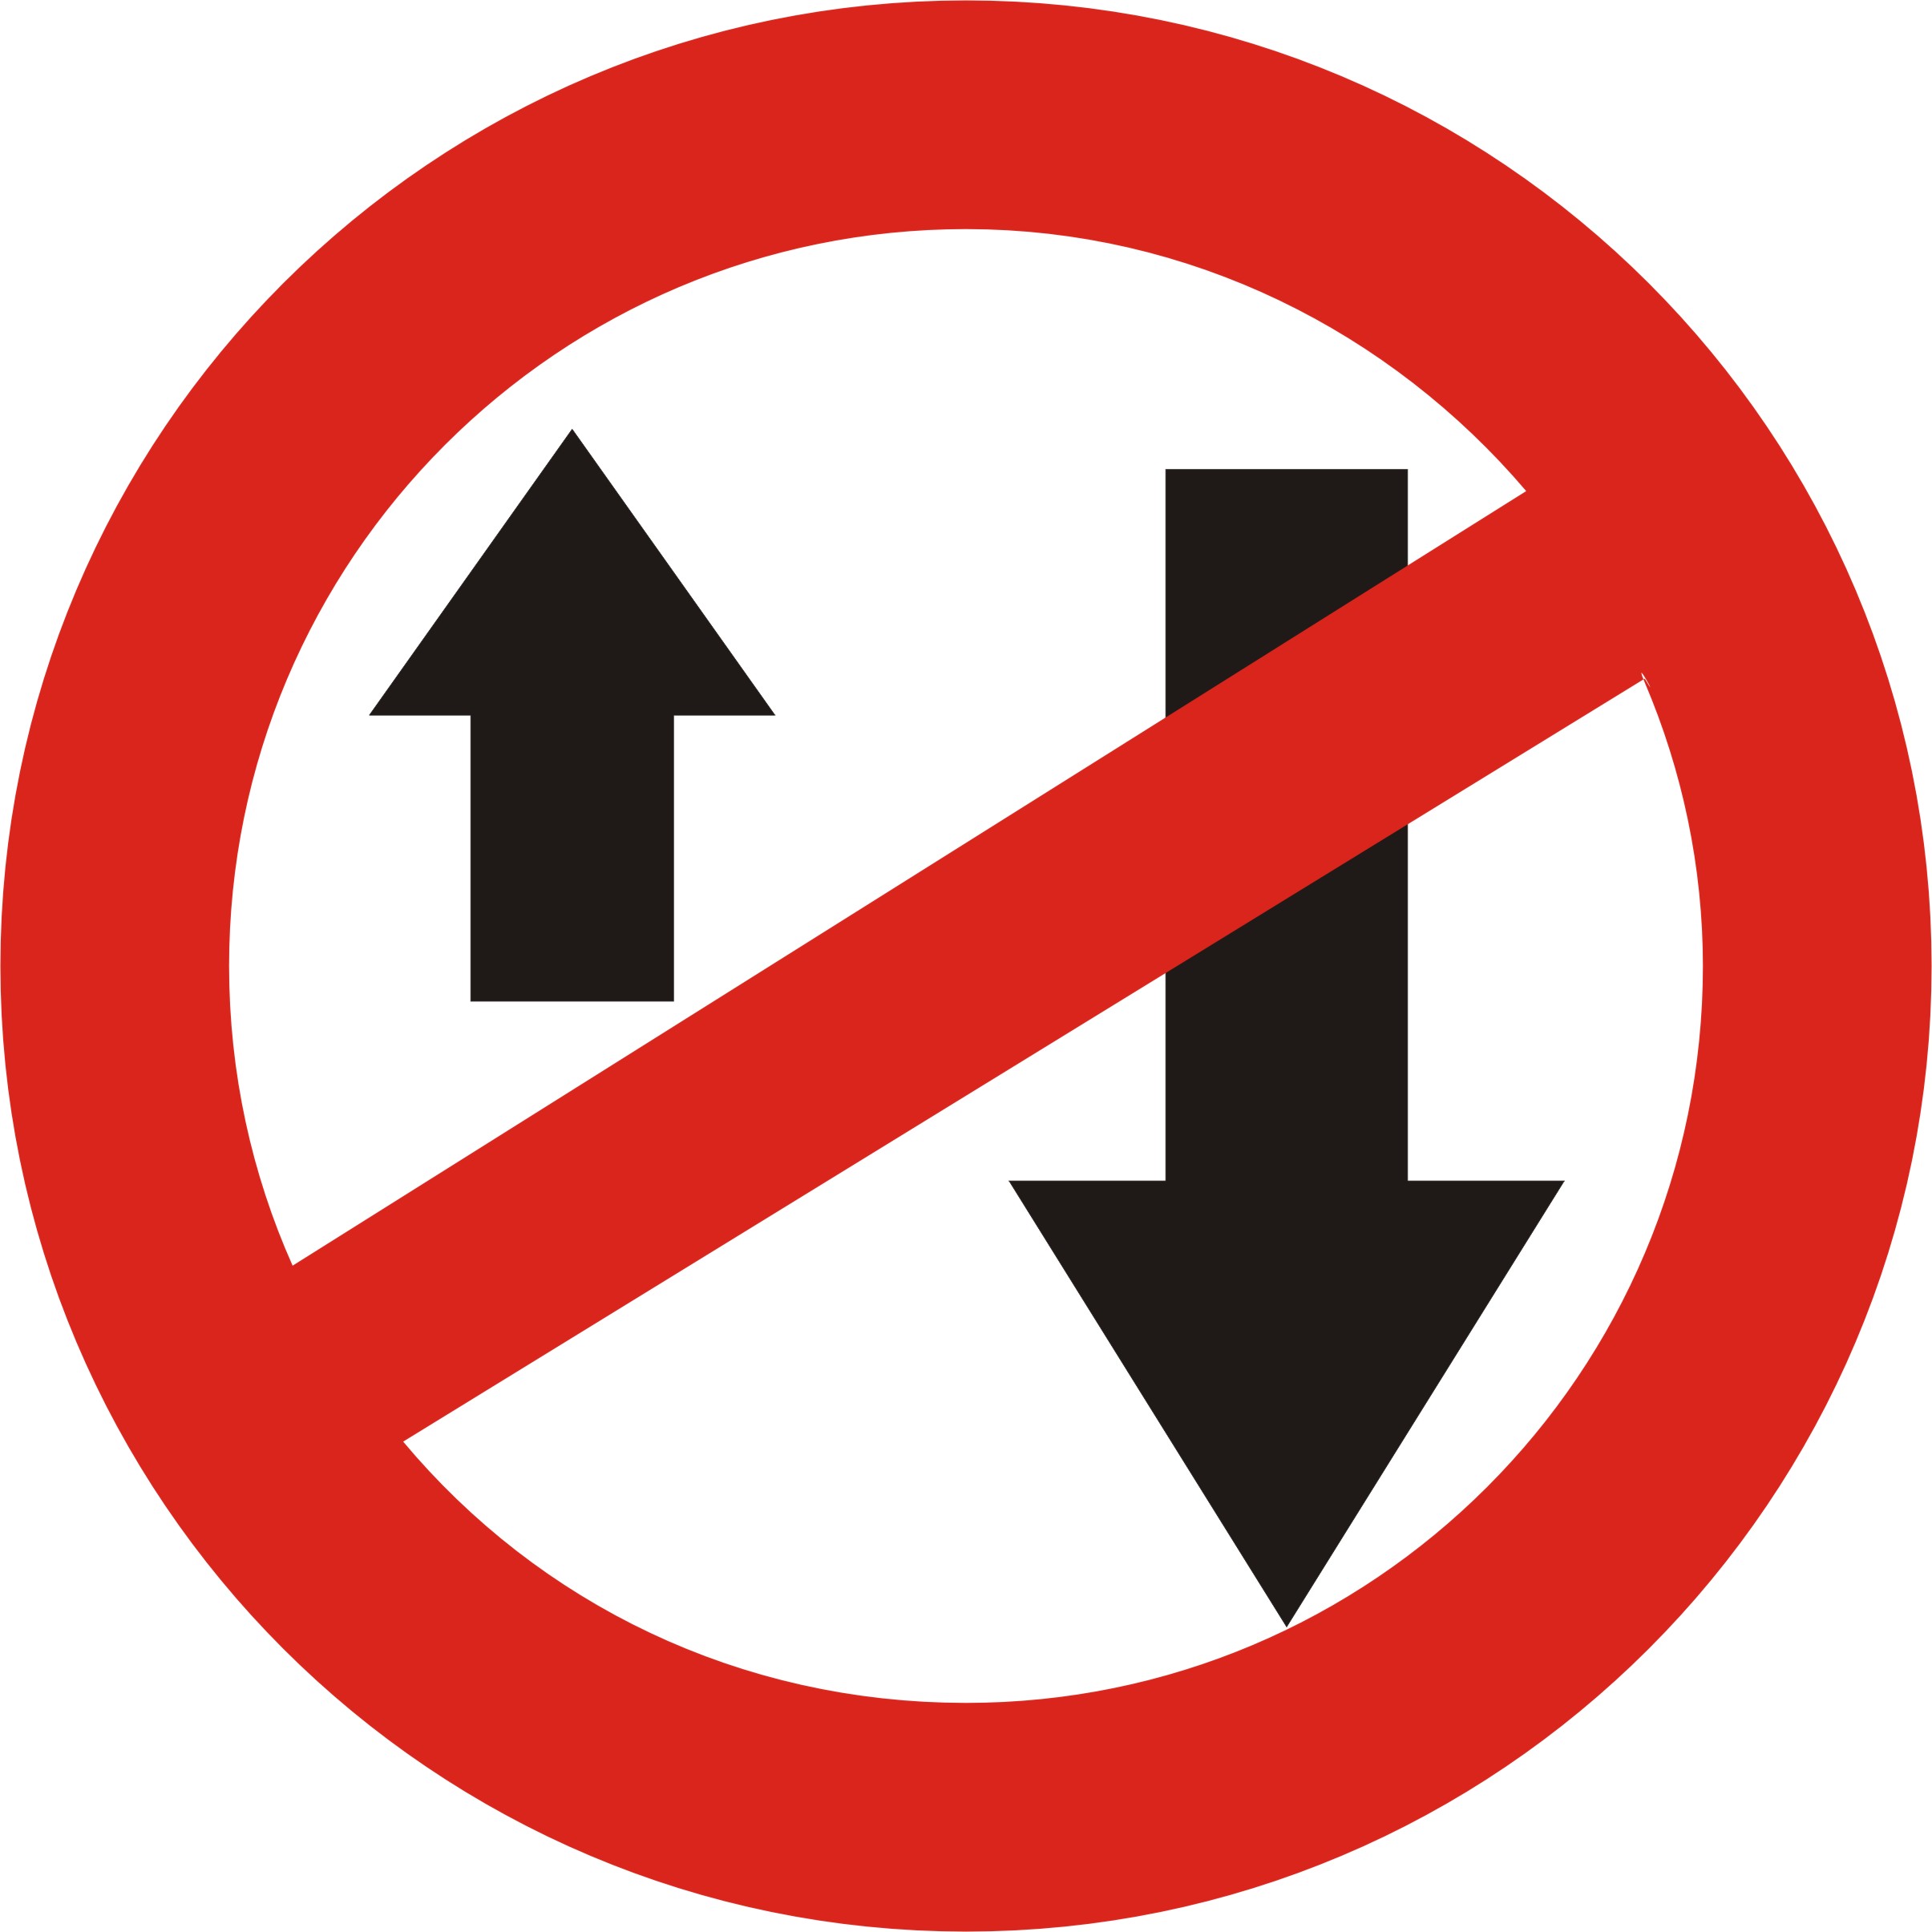 Road Sign No Entry Right.jpg